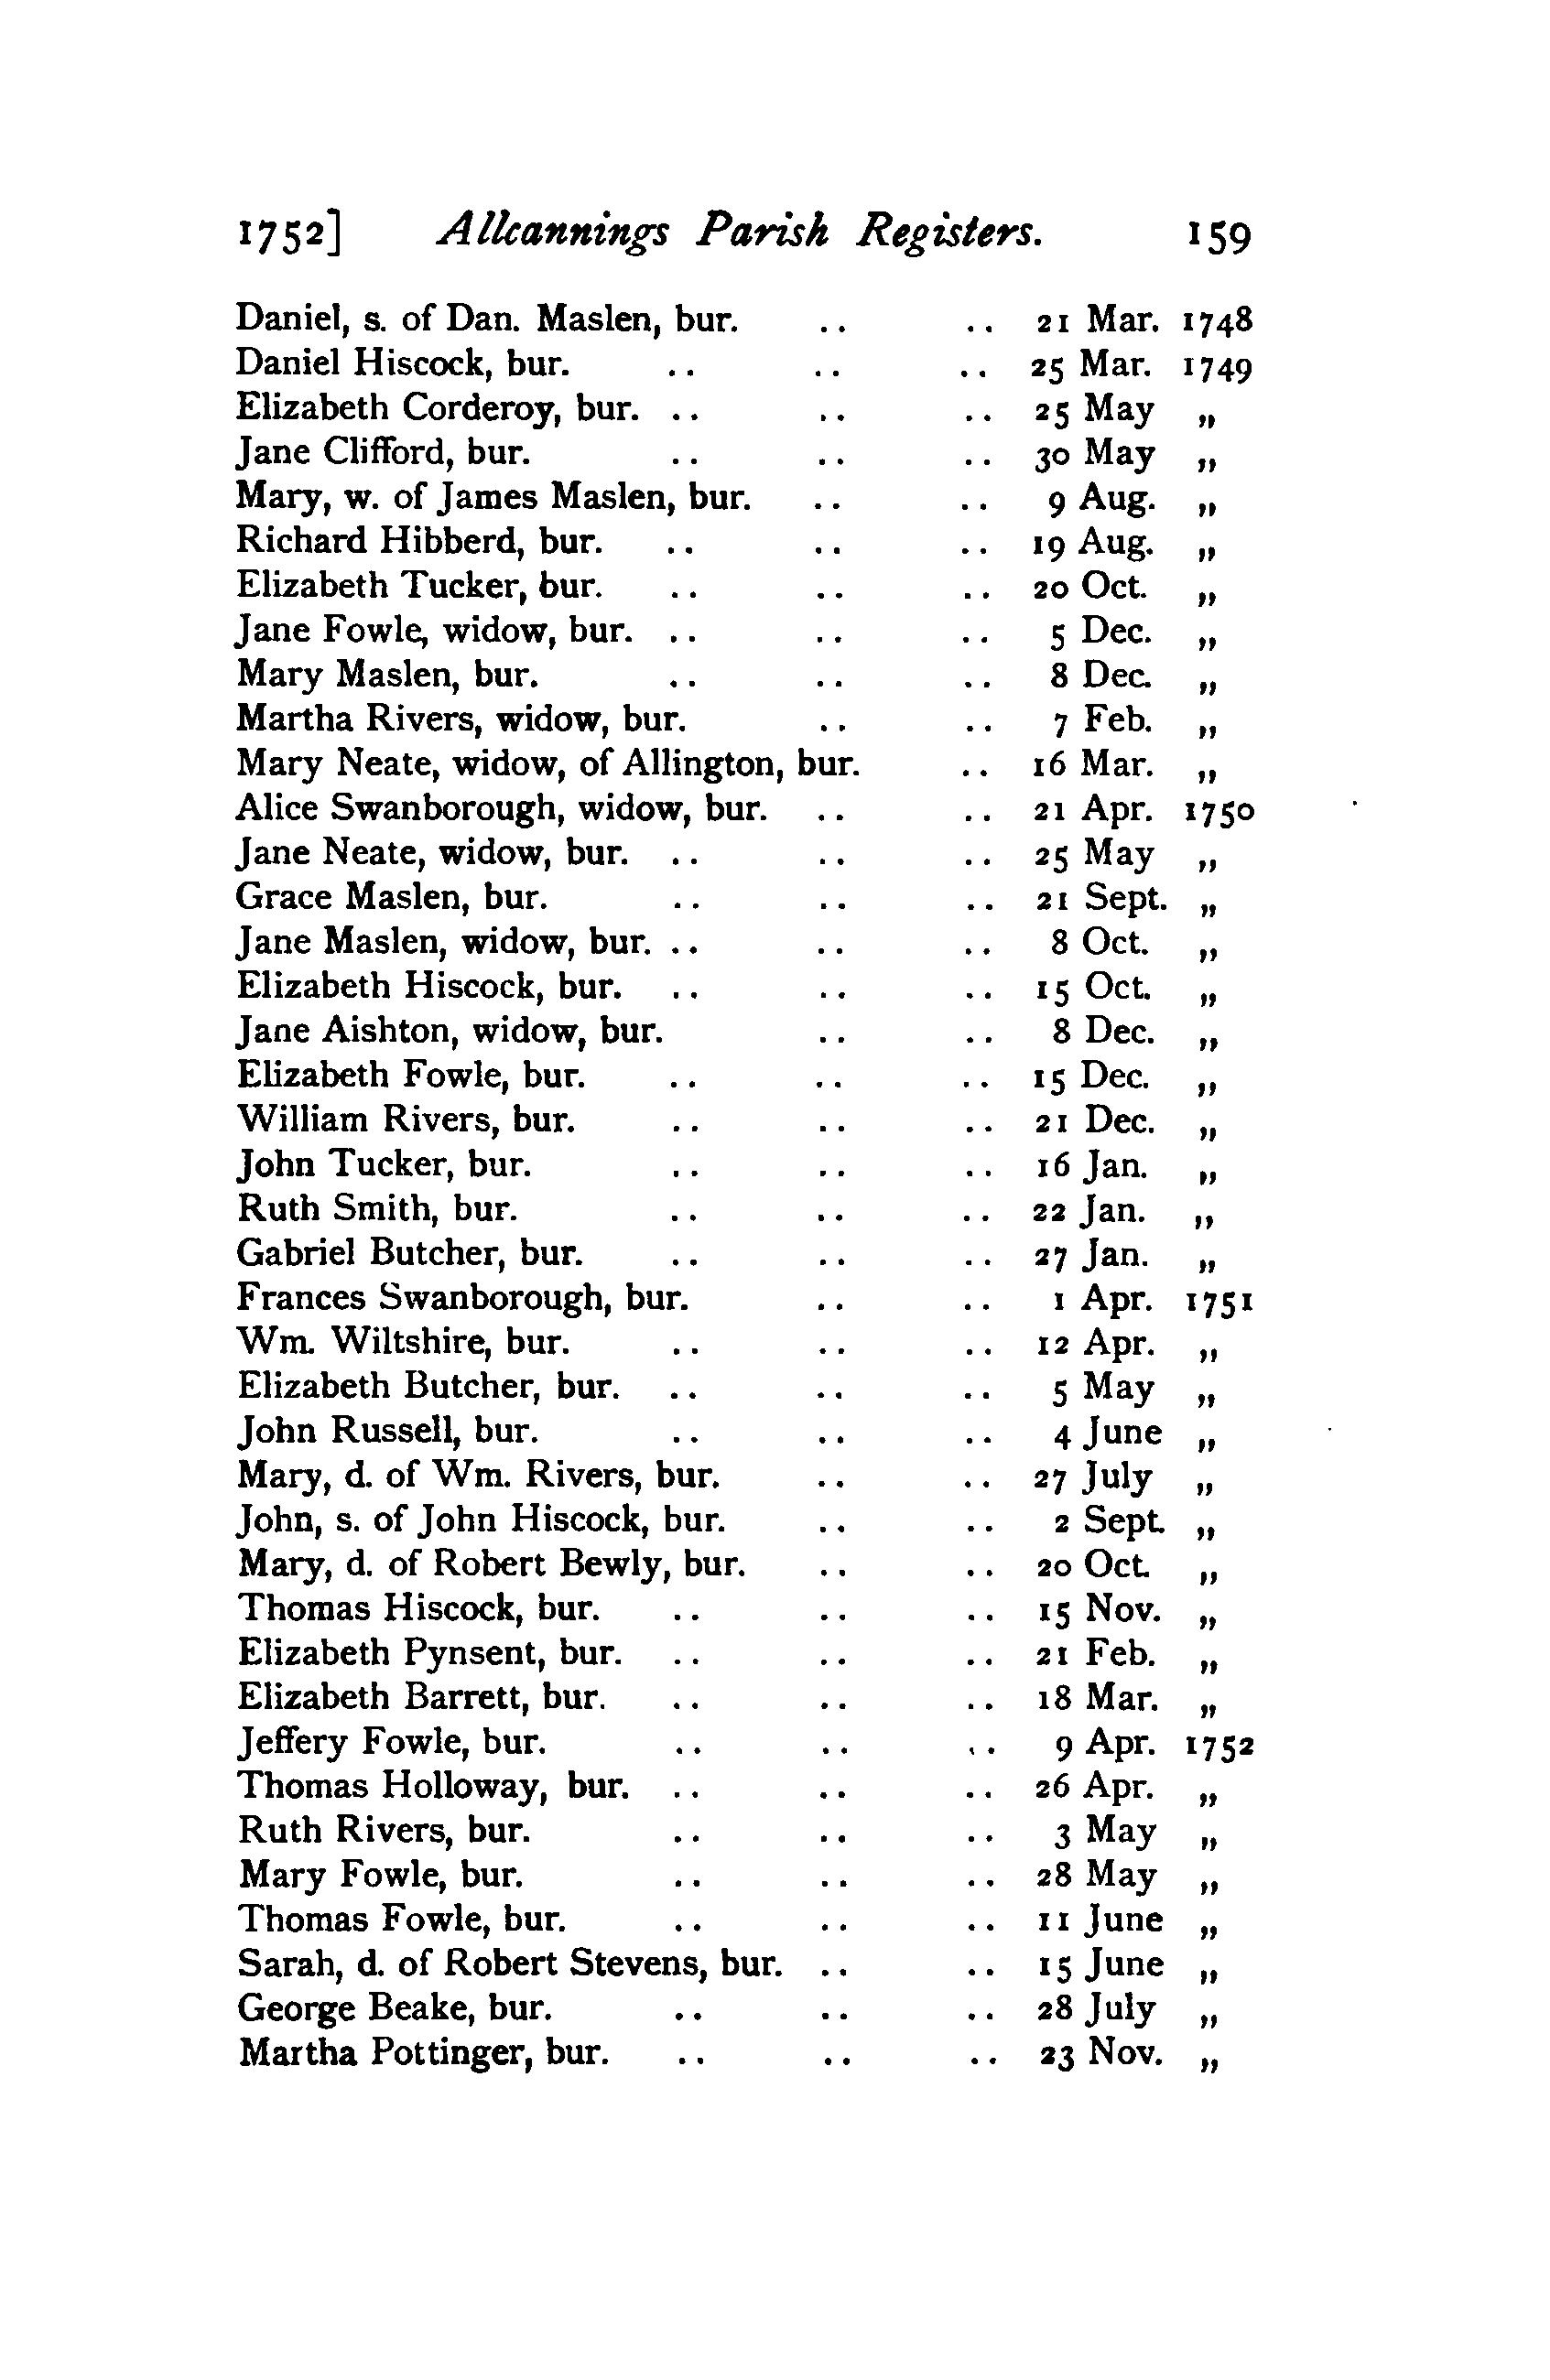 Page 59 of 1905 transcript of All Cannings registers showing burial of Alice Swanborough, widow in 1750.